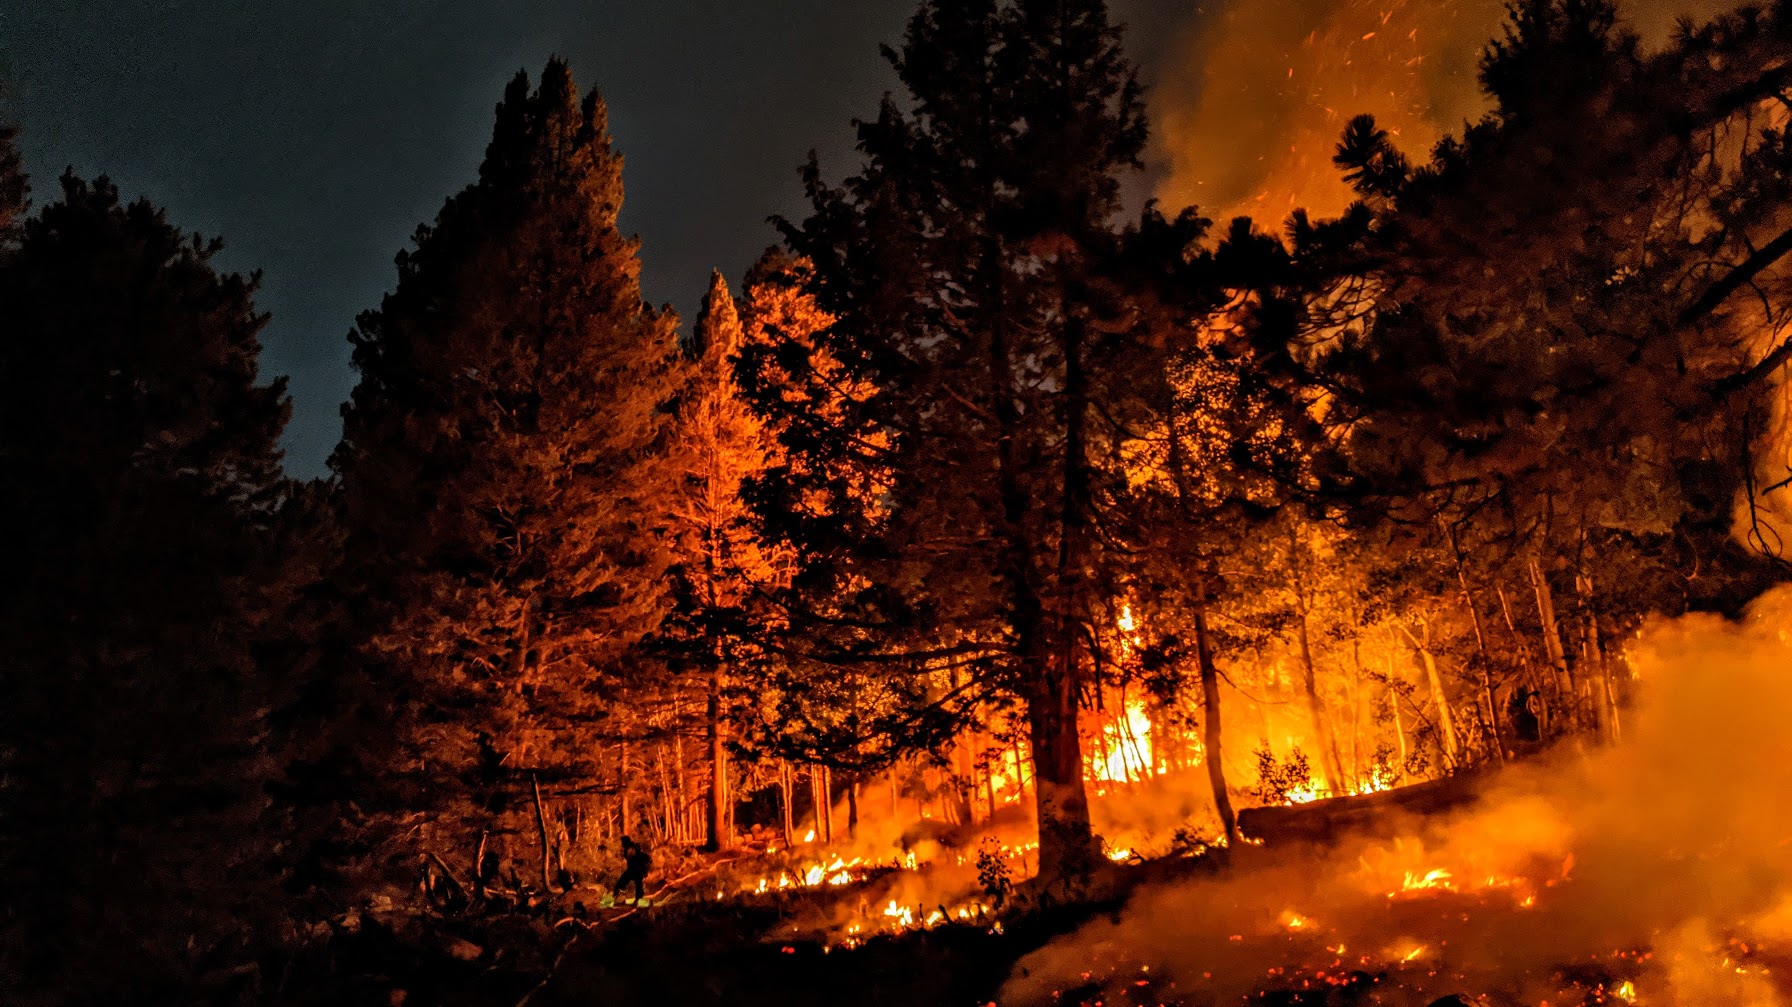 A blazing wildfire, many of which could be prevented with civilian timber management.